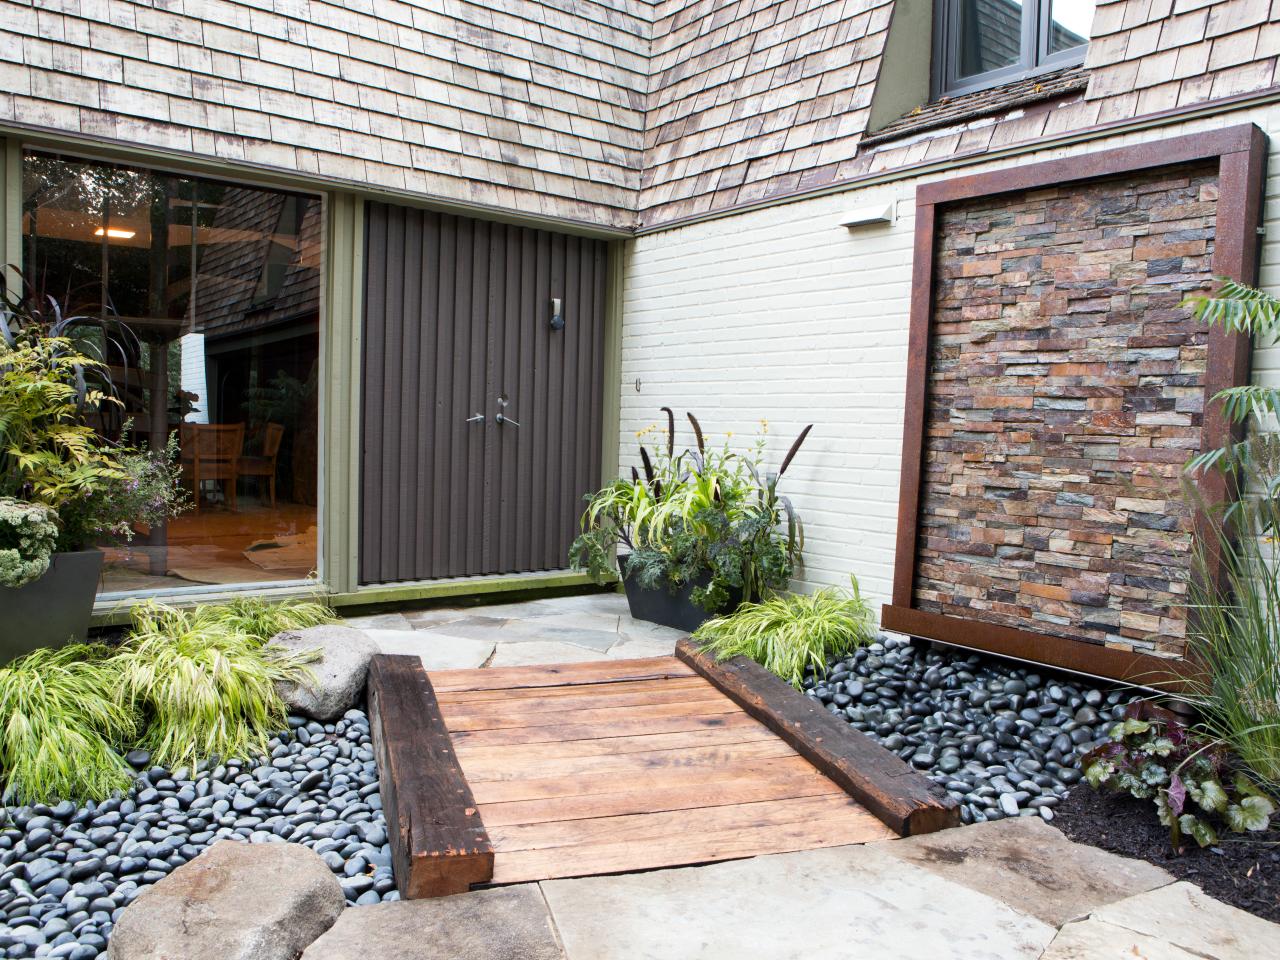 How To Use Railroad Ties For Landscaping